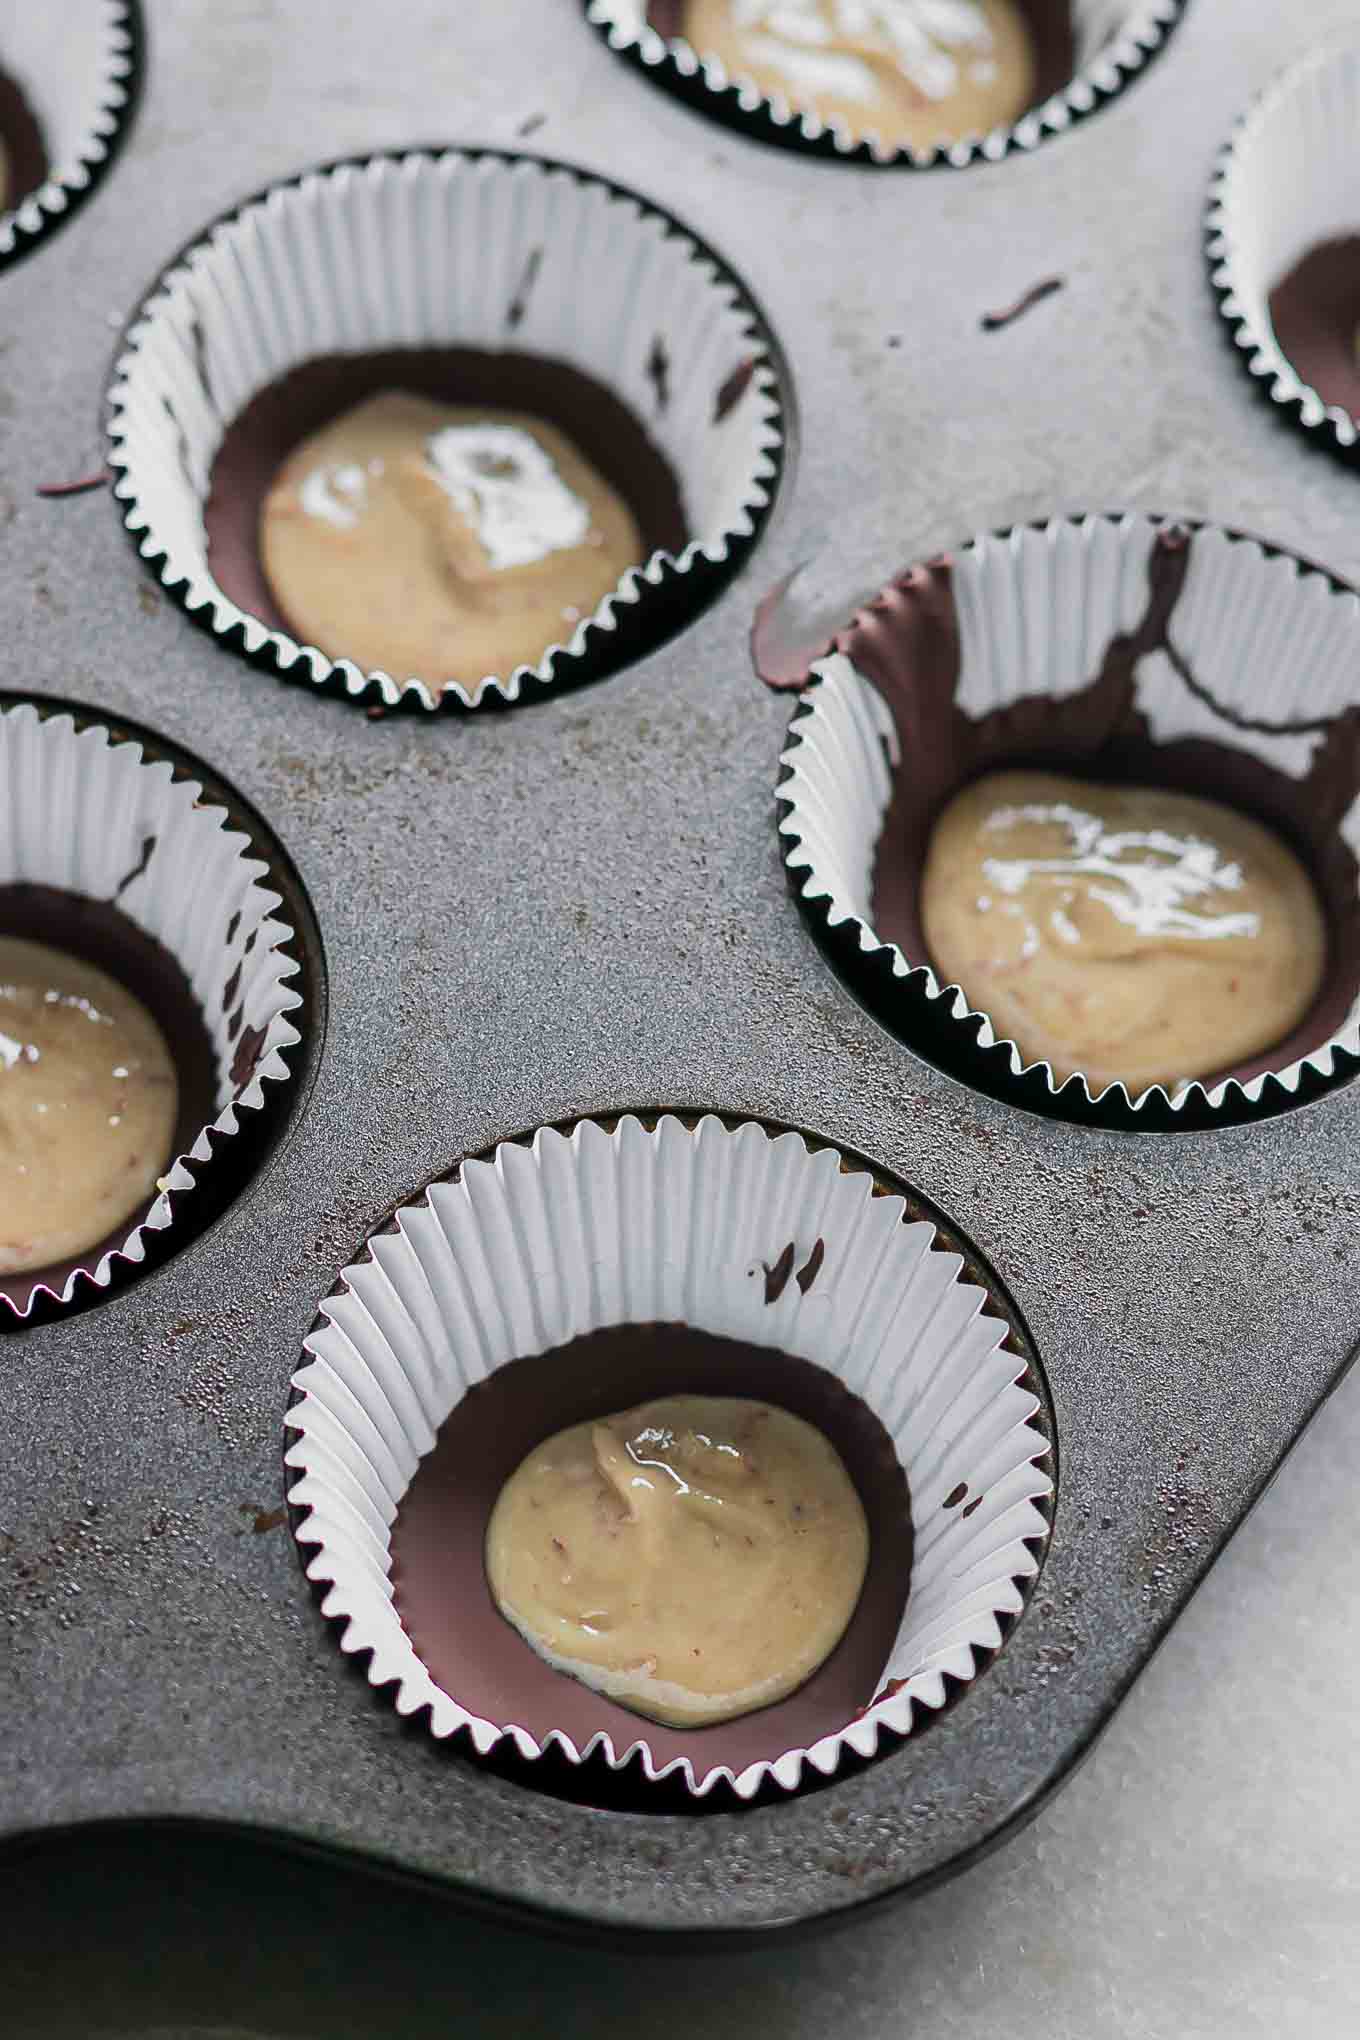 dark chocolate and tahini inside muffins liners in a muffin tin